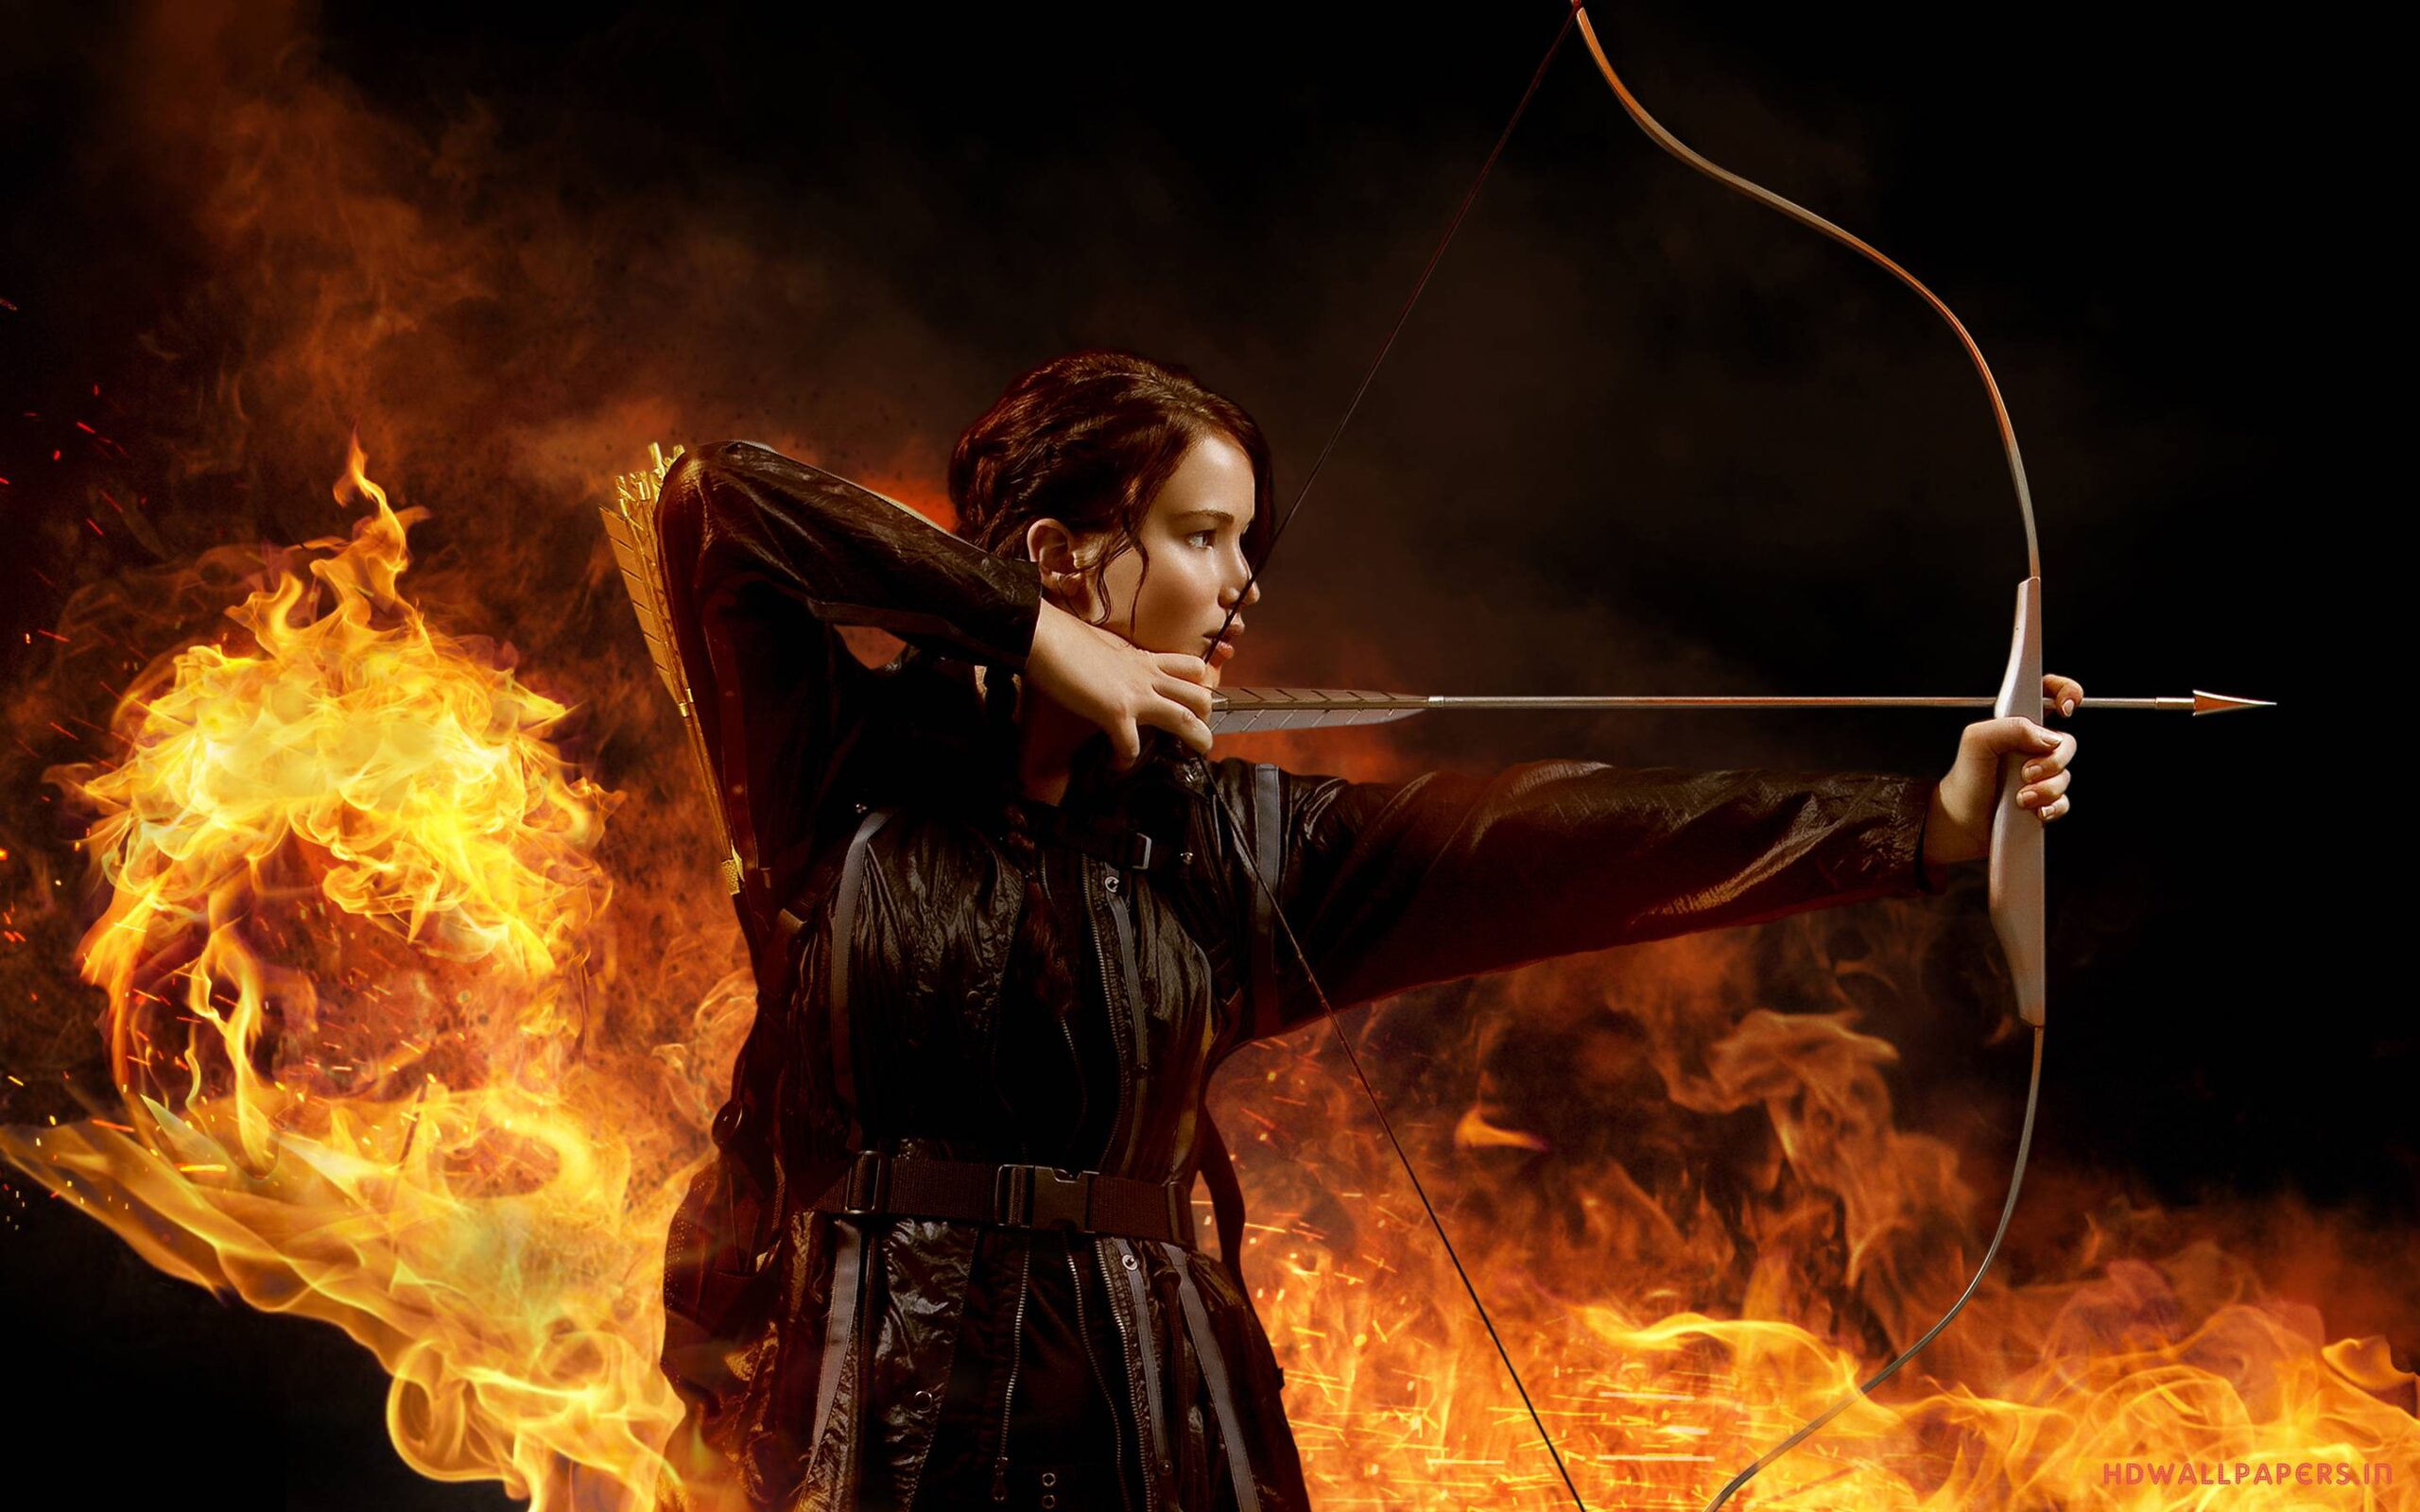 Jennifer Lawrence in The Hunger Games Wallpapers